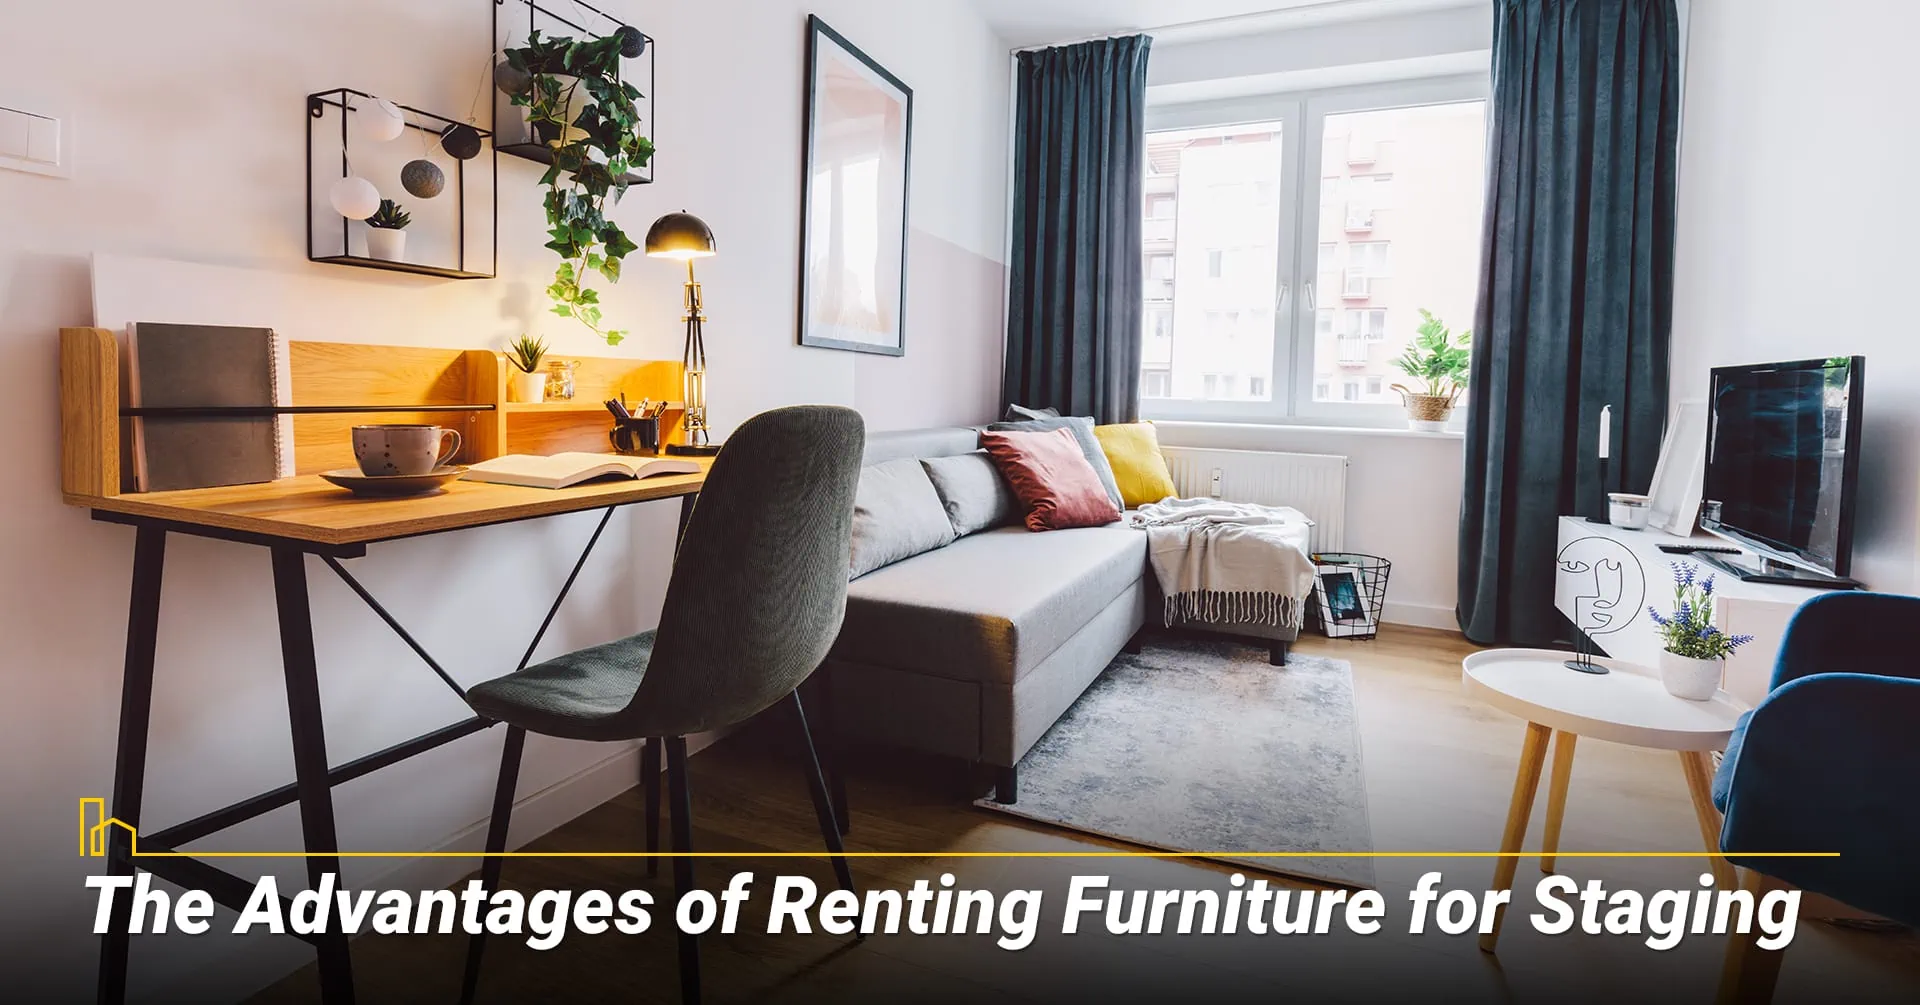 The Advantages of Renting Furniture for Staging